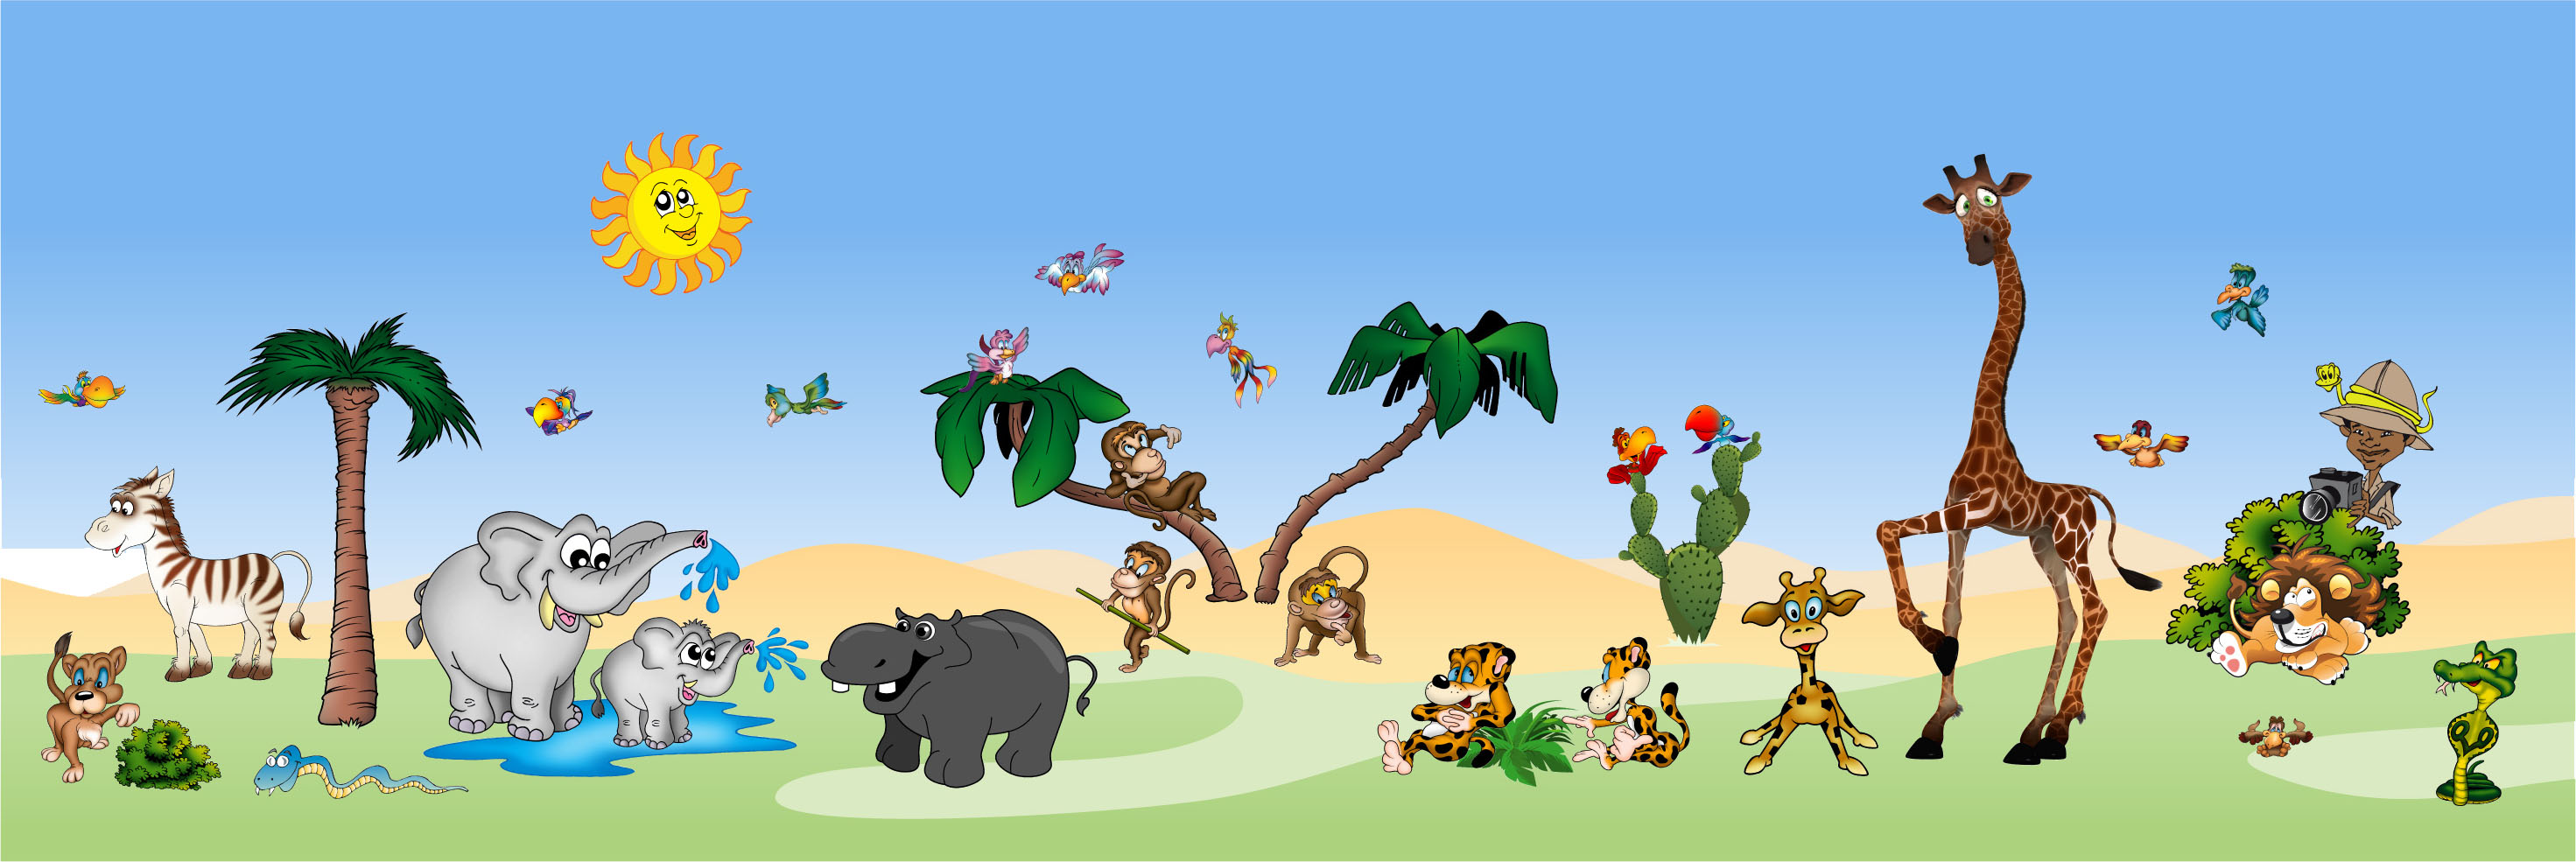 14 Cartoon Jungle Animal Pictures Free Cliparts That You Can Download